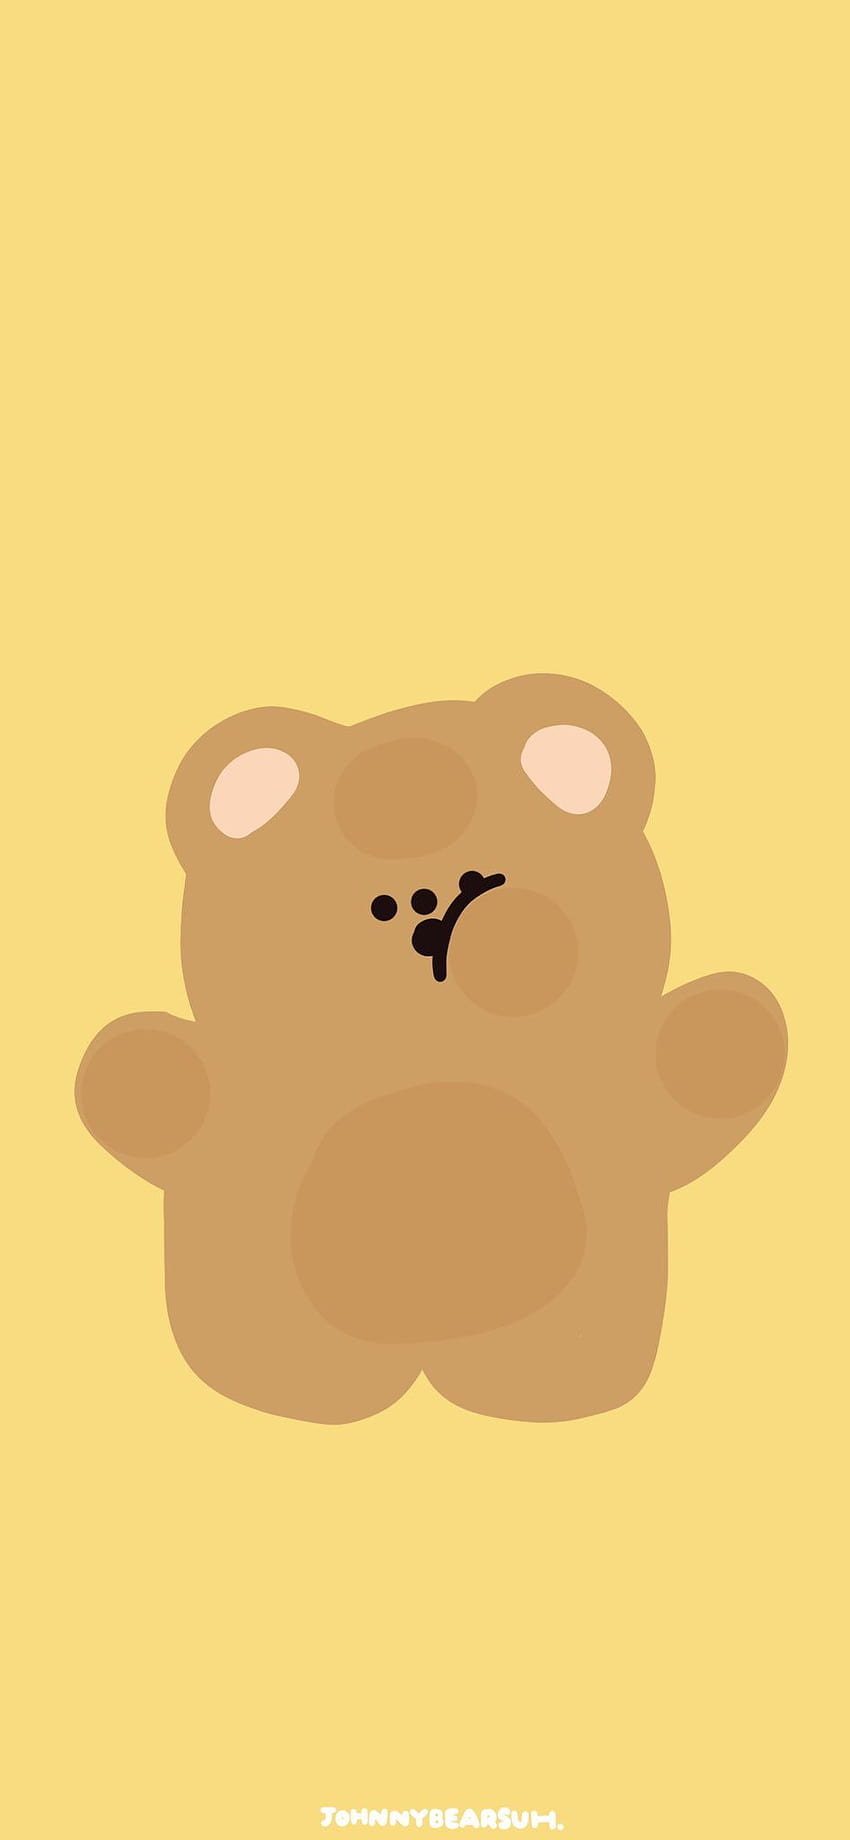 Teddy Aesthetic posted by Zoey Thompson, teddy bear aesthetic HD phone wallpaper